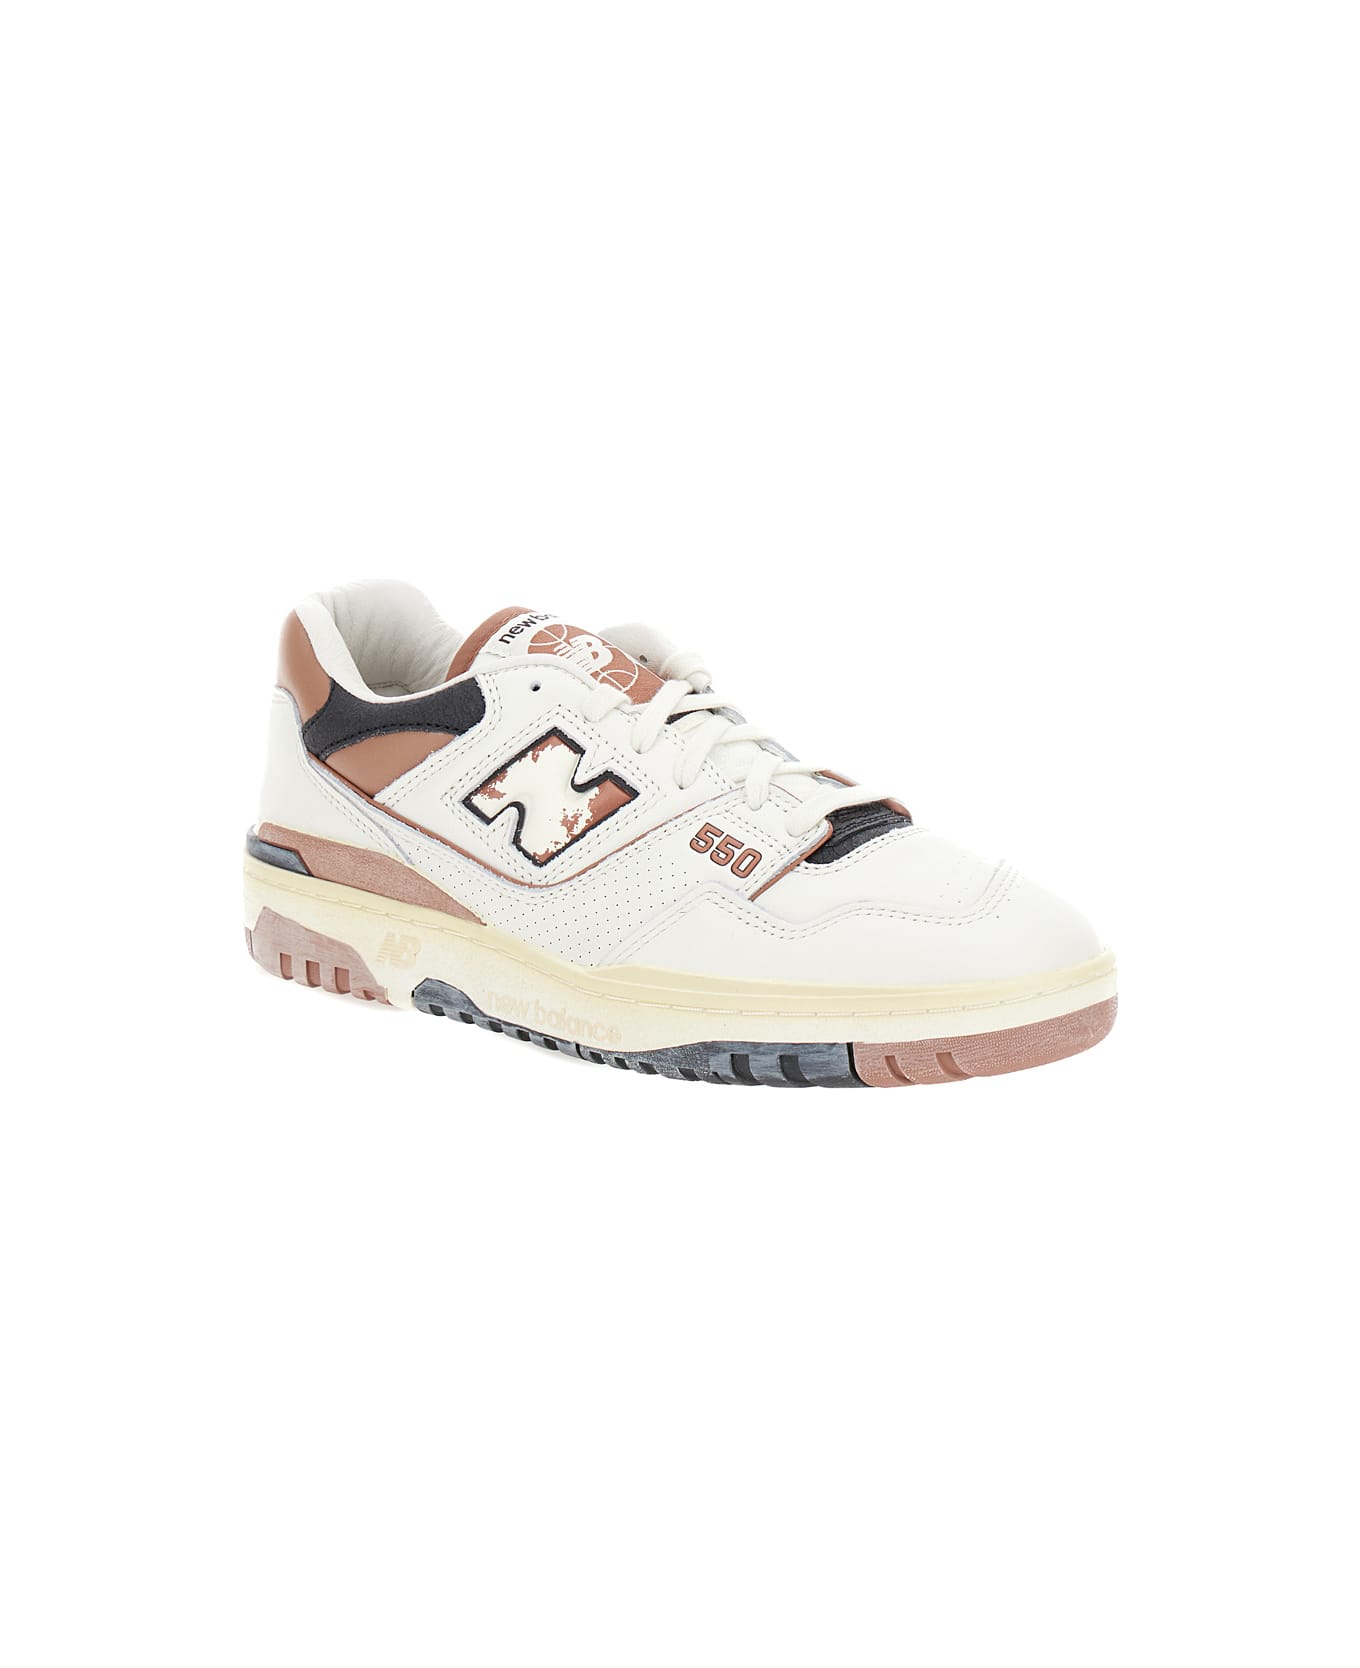 New Balance '550' White And Brown Low Top Sneakers With Logo And Contrasting Details In Leather Man - Brown